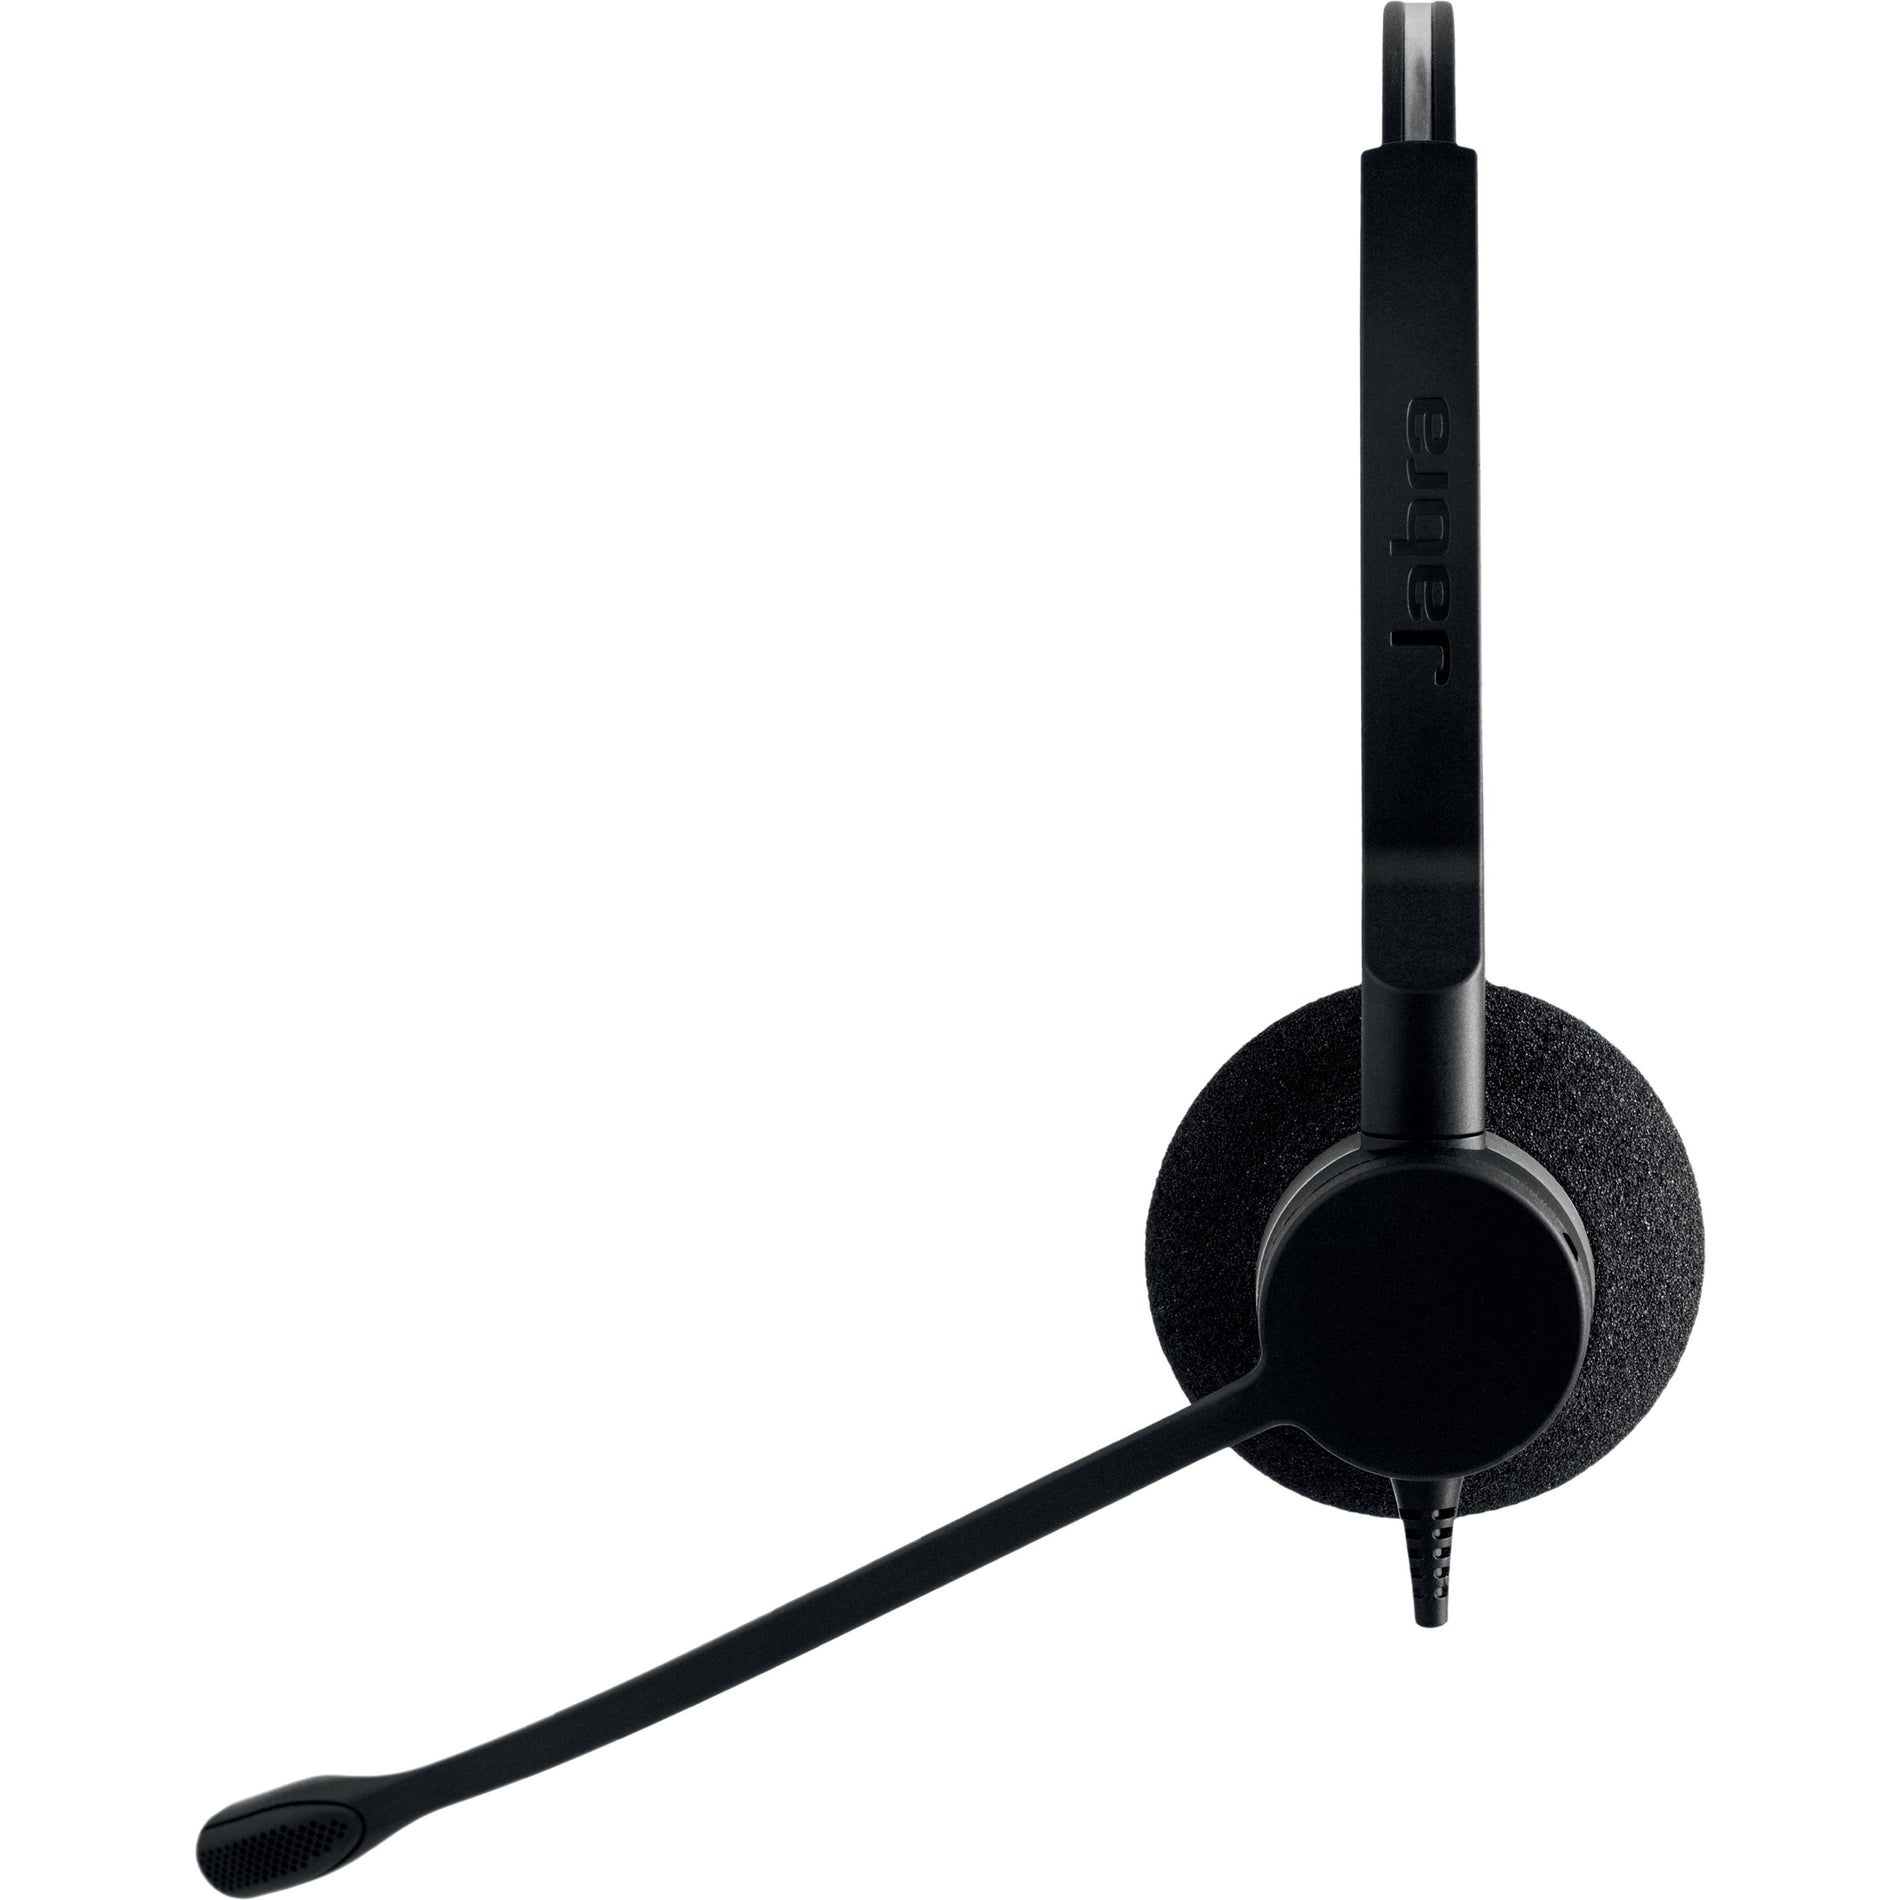 Jabra 2309-820-119 BIZ 2300 QD Duo Headset Over-the-head Stereo Headset with Boom Microphone 